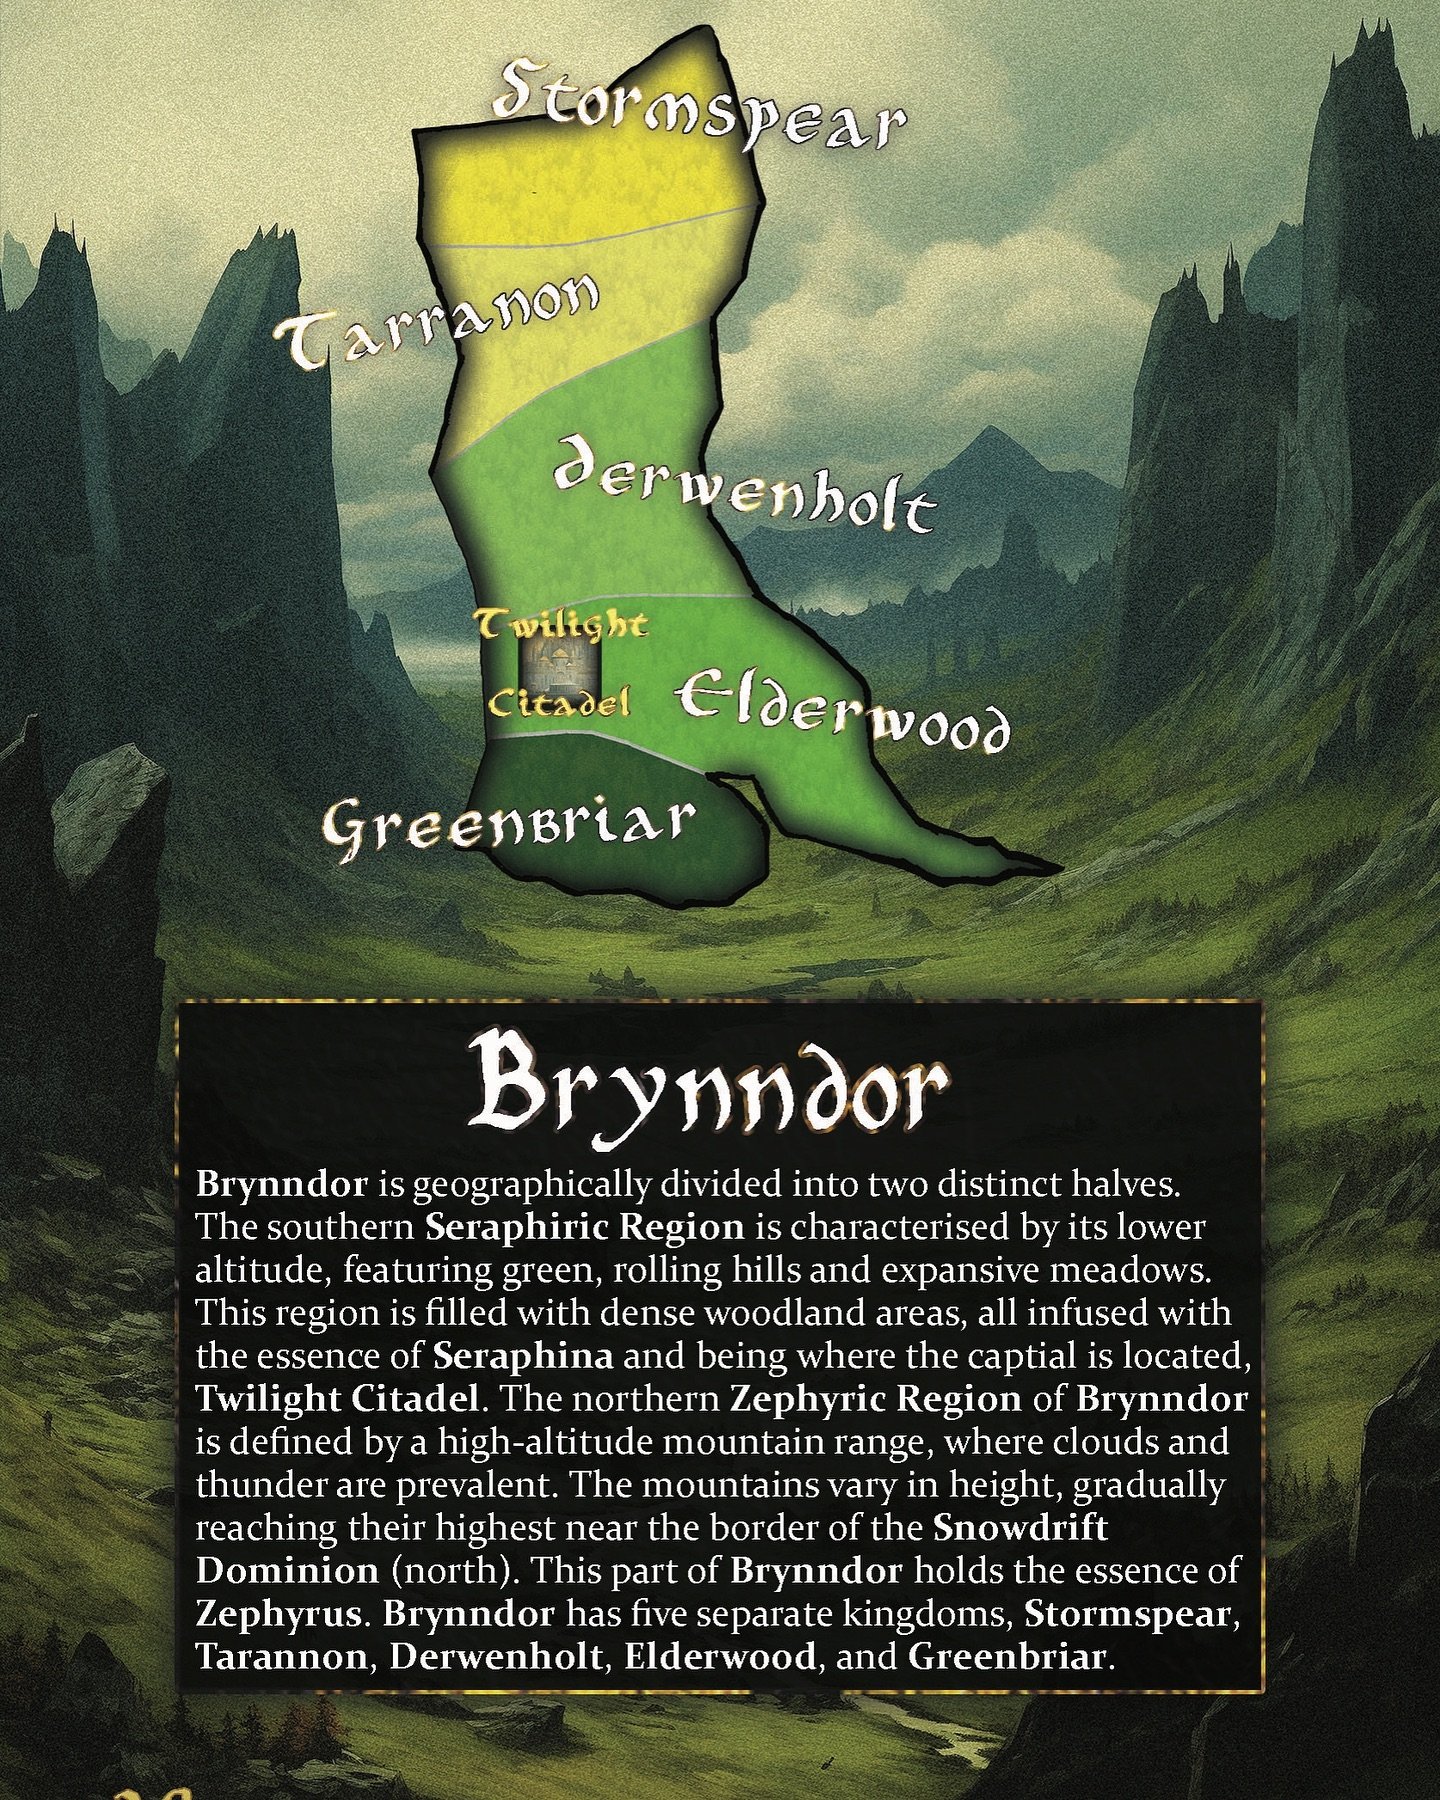 The country of Brynndor 🌳⚡️

Read more from the link in my bio 🎁

𝕱𝖔𝖑𝖑𝖔𝖜 𝖙𝖔 𝖏𝖔𝖎𝖓 𝖙𝖍𝖊 𝖈𝖆𝖒𝖕𝖆𝖎𝖌𝖓🔮
@twilightcitadel ⬅️

🗡️: #dnd
🗡️: #darkart
🗡️: #darkfantasyart 
🗡️: #darkfantasy 
🗡️: #darkfantasyartist 
🗡️: #retrofantasy